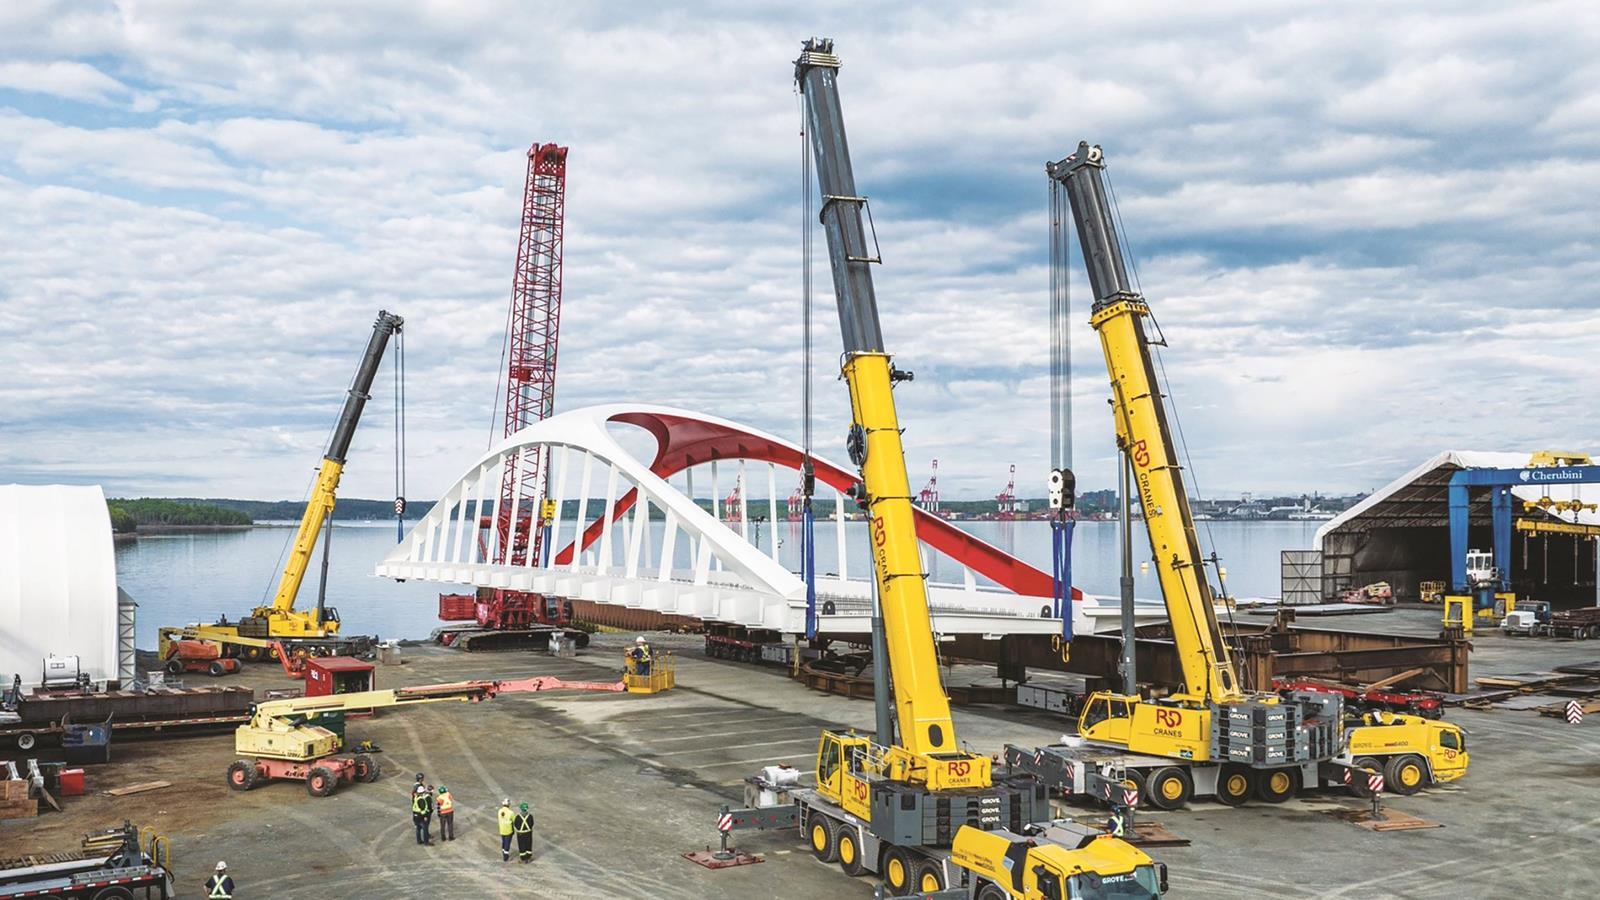 Canadian customer R&D Crane used one of the Shady Grove manufacturer’s Model 16000 crawlers, along with three of its Grove all-terrain cranes, on a 466-tonne bridge lift.